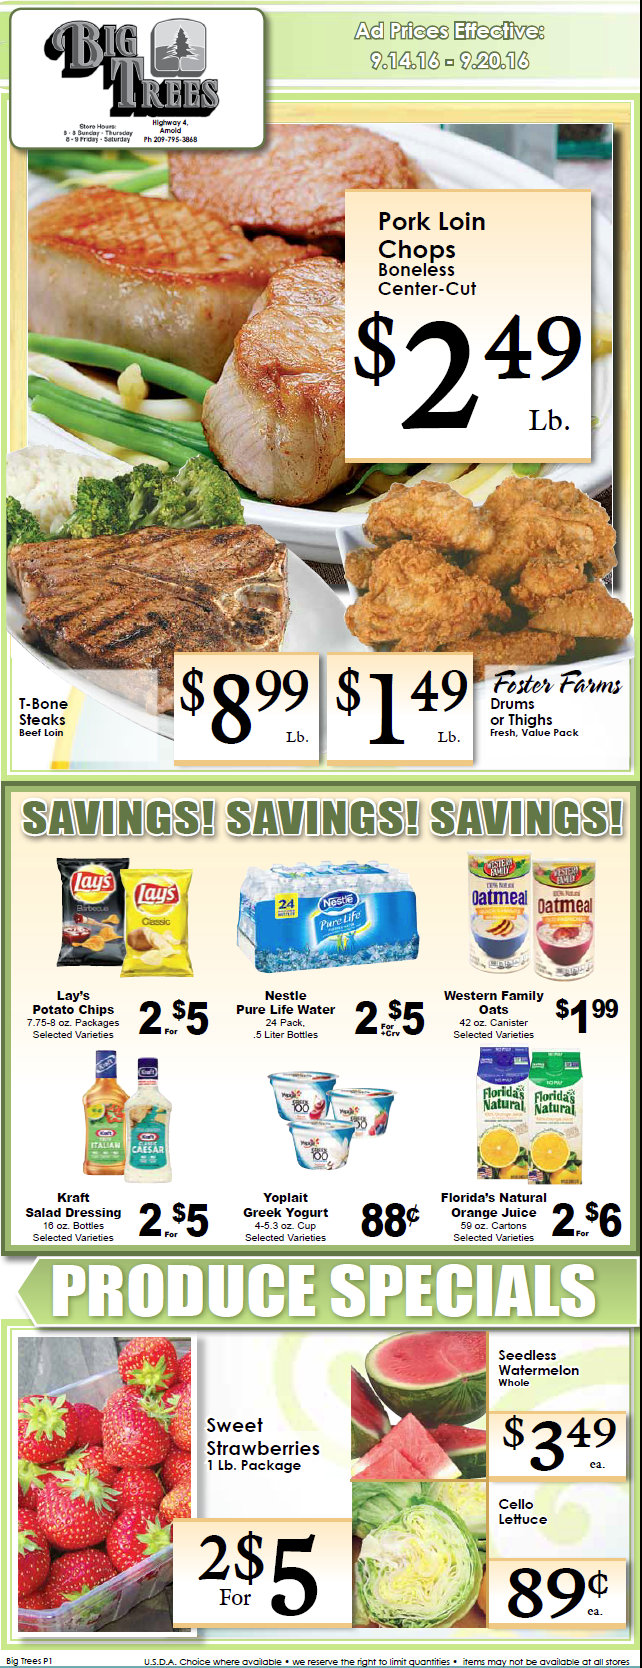 Big Trees Market Weekly Specials & Grocery Ads Through September 20th